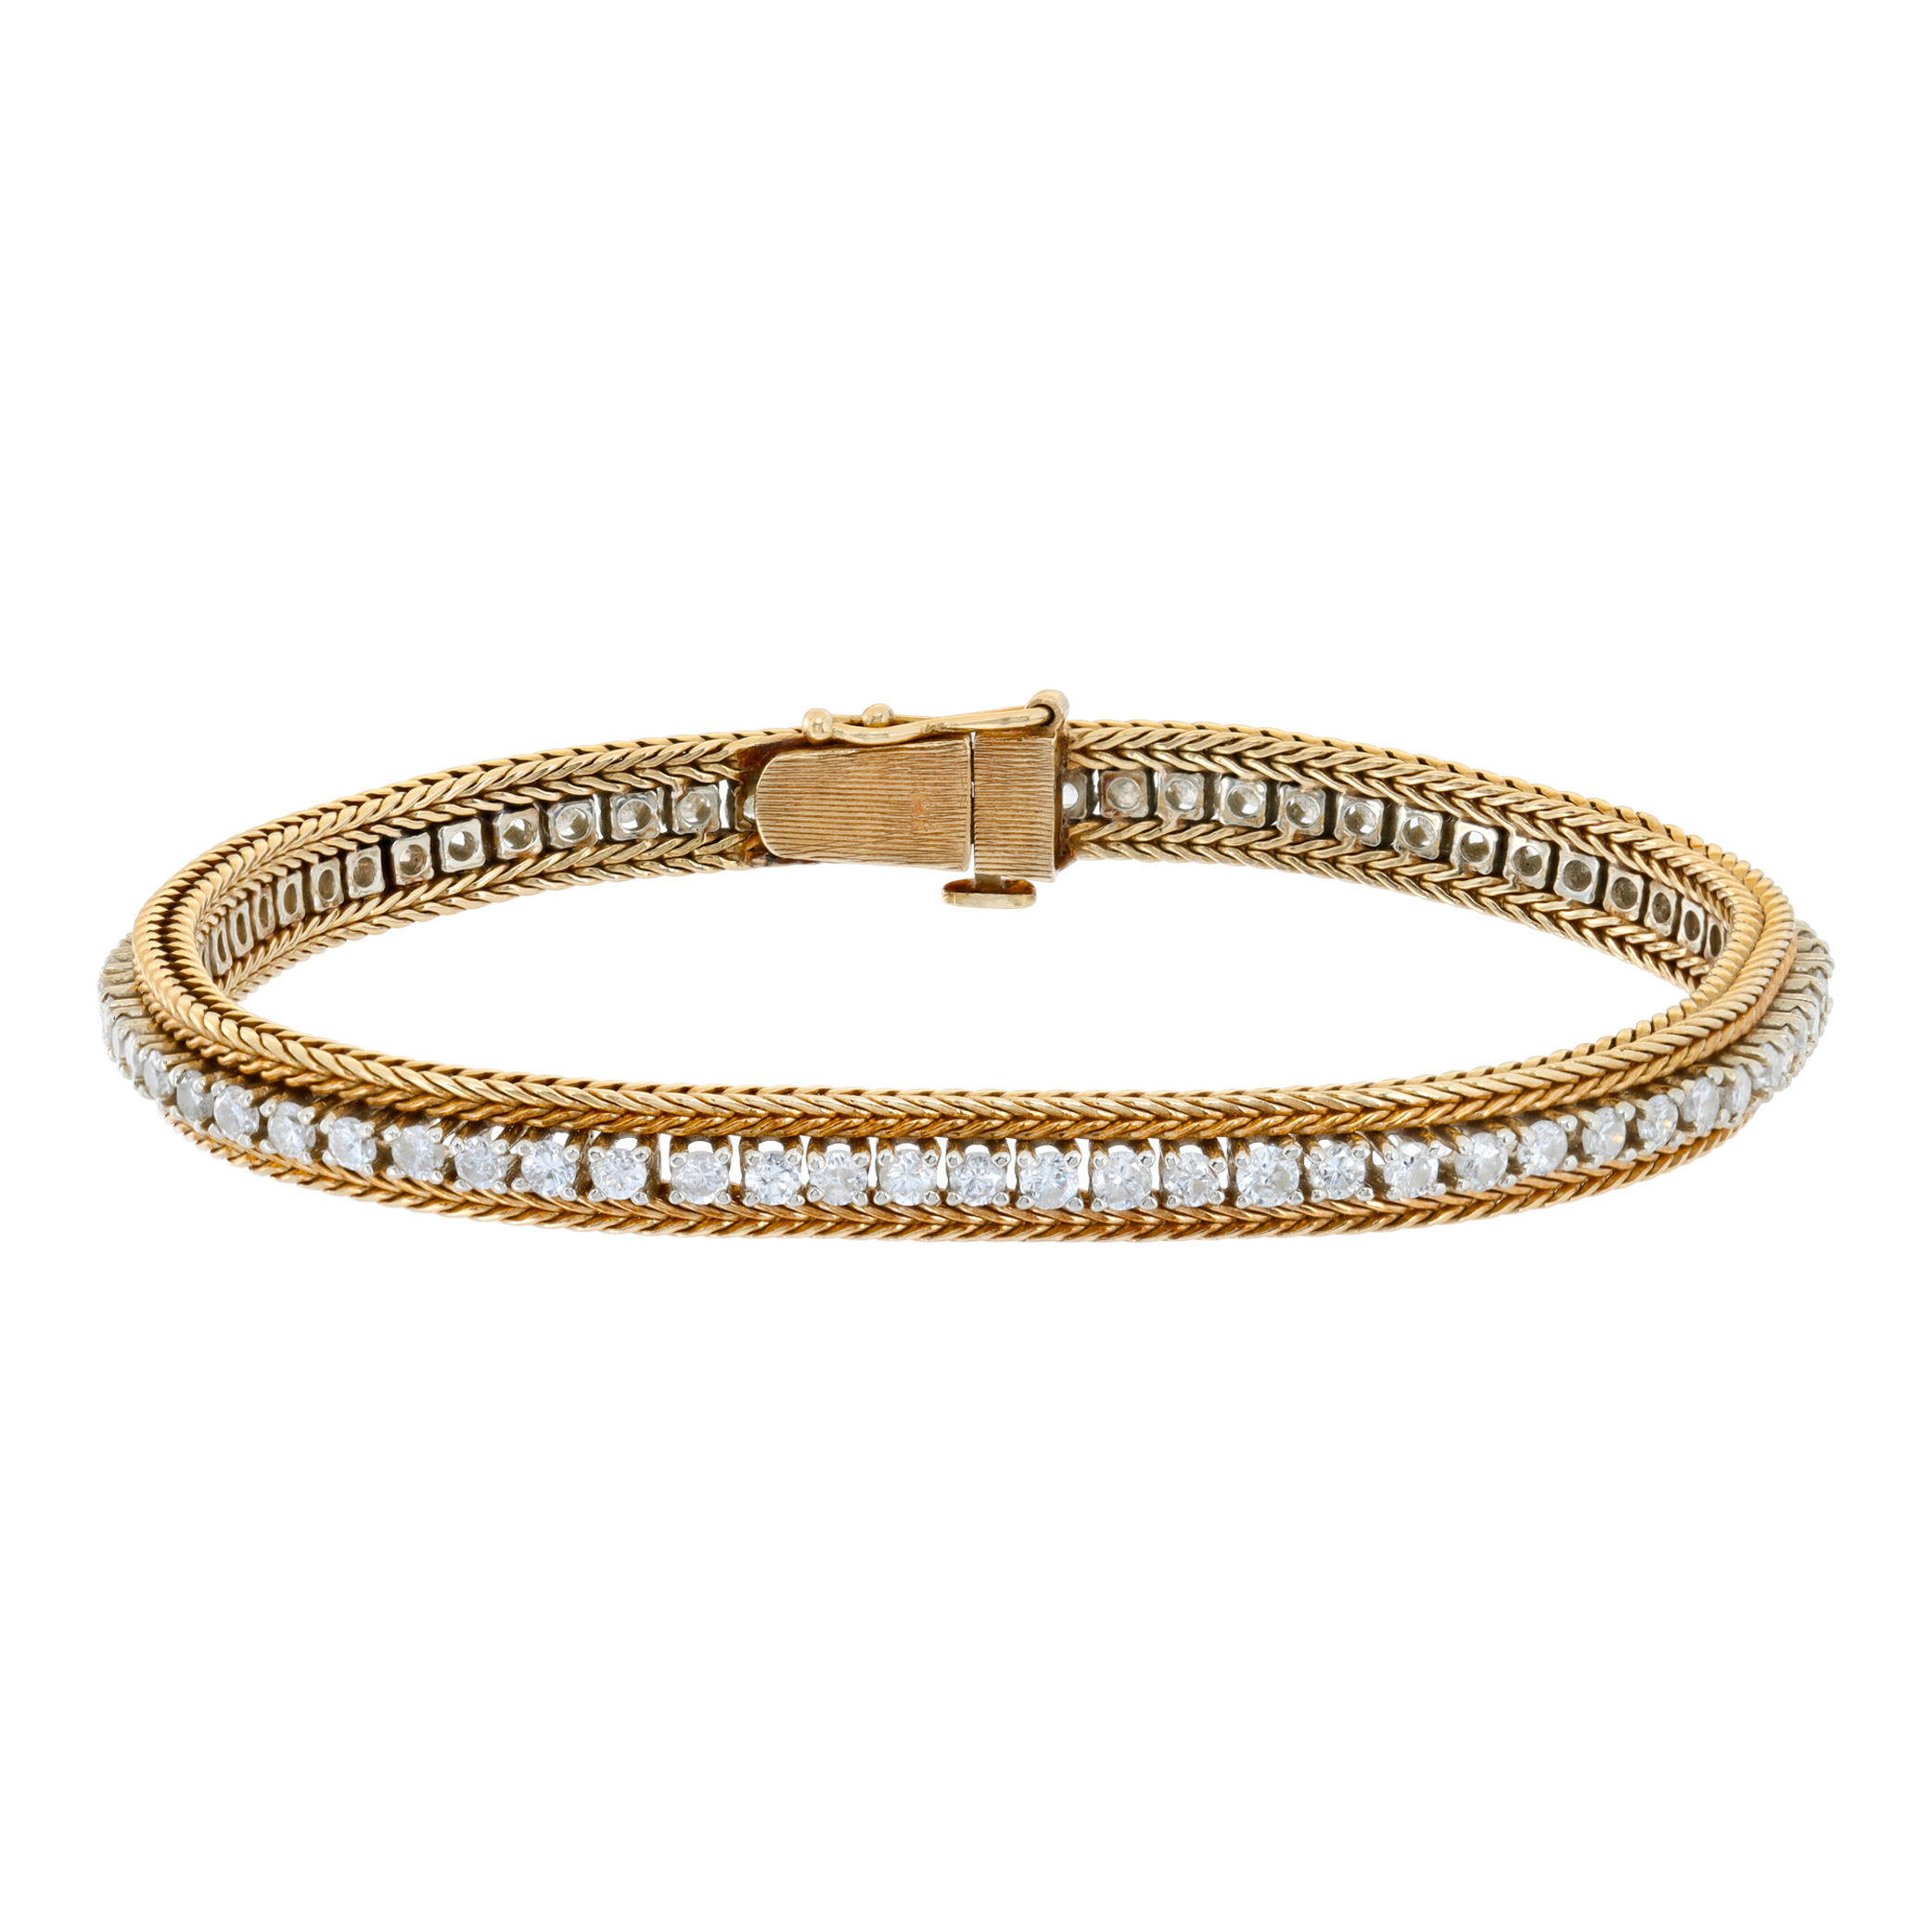 Diamond line bracelet in 14k white & yellow gold with approximately 2.10 carats in round diamonds. (Stones)